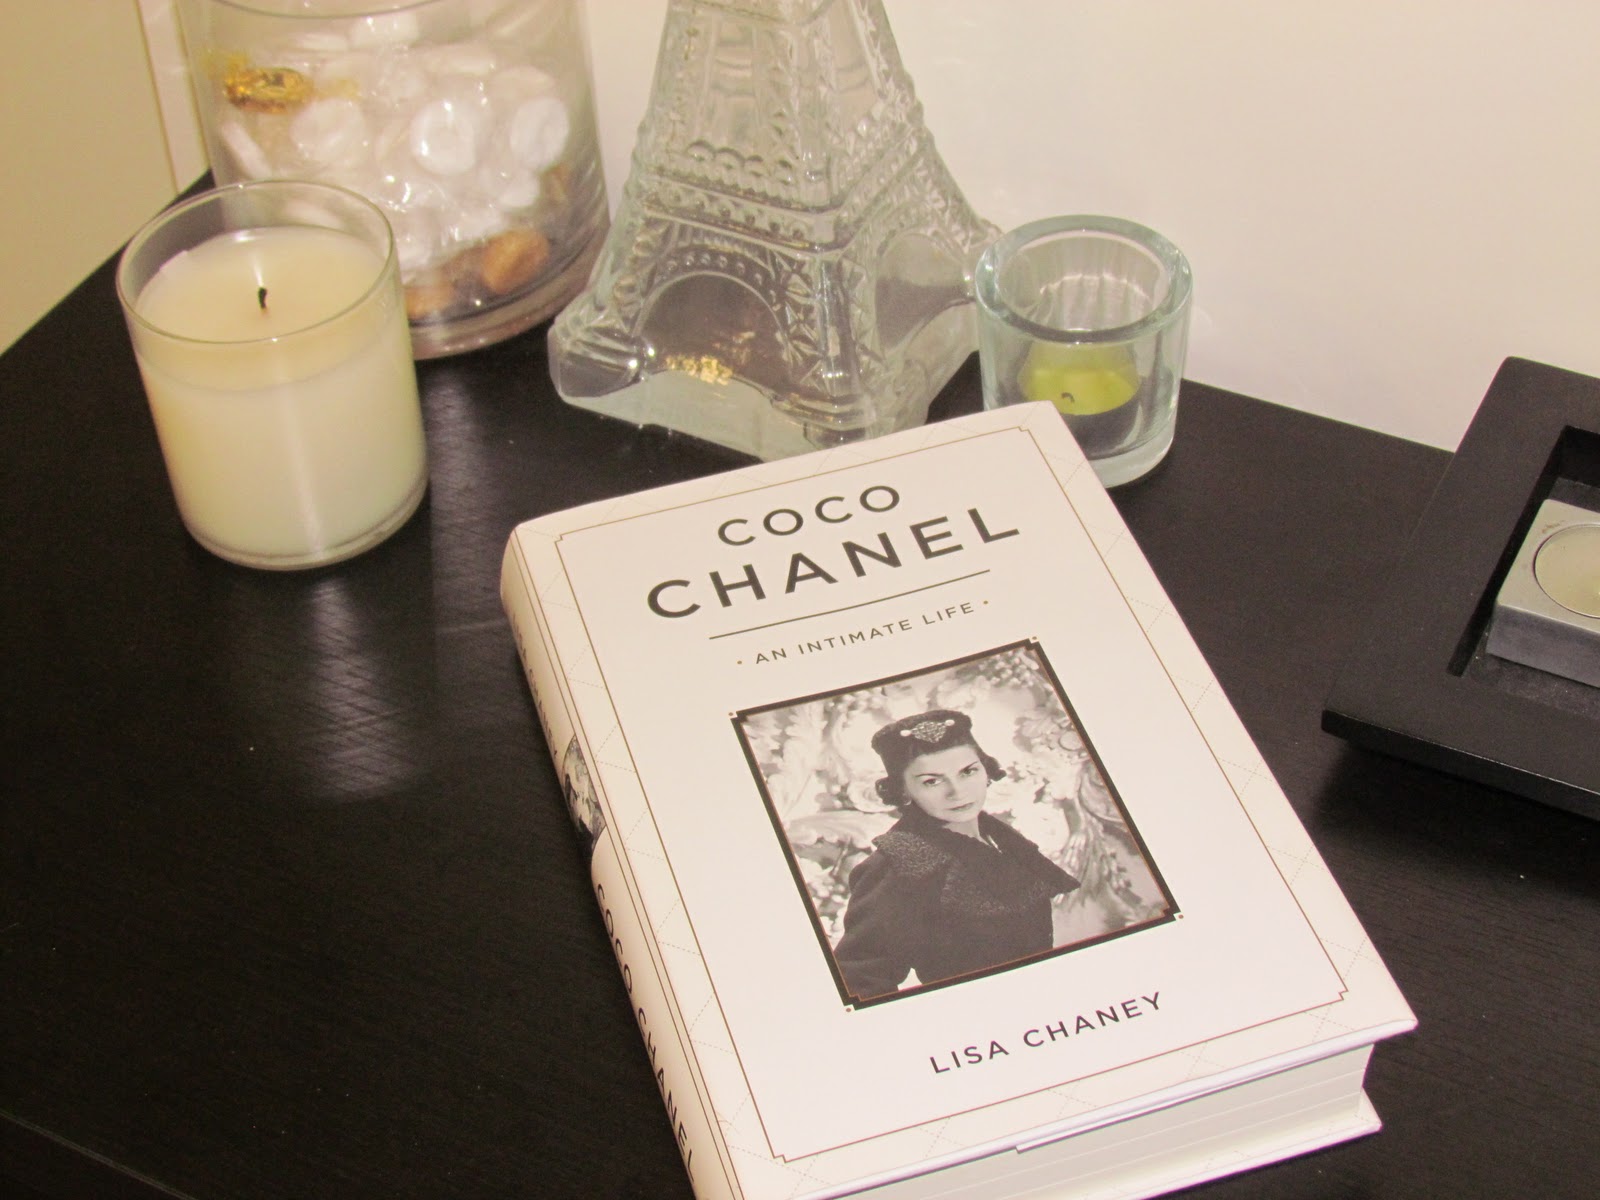 Coco Chanel An Intimate Life by Lisa Chaney ~ Art Books Events